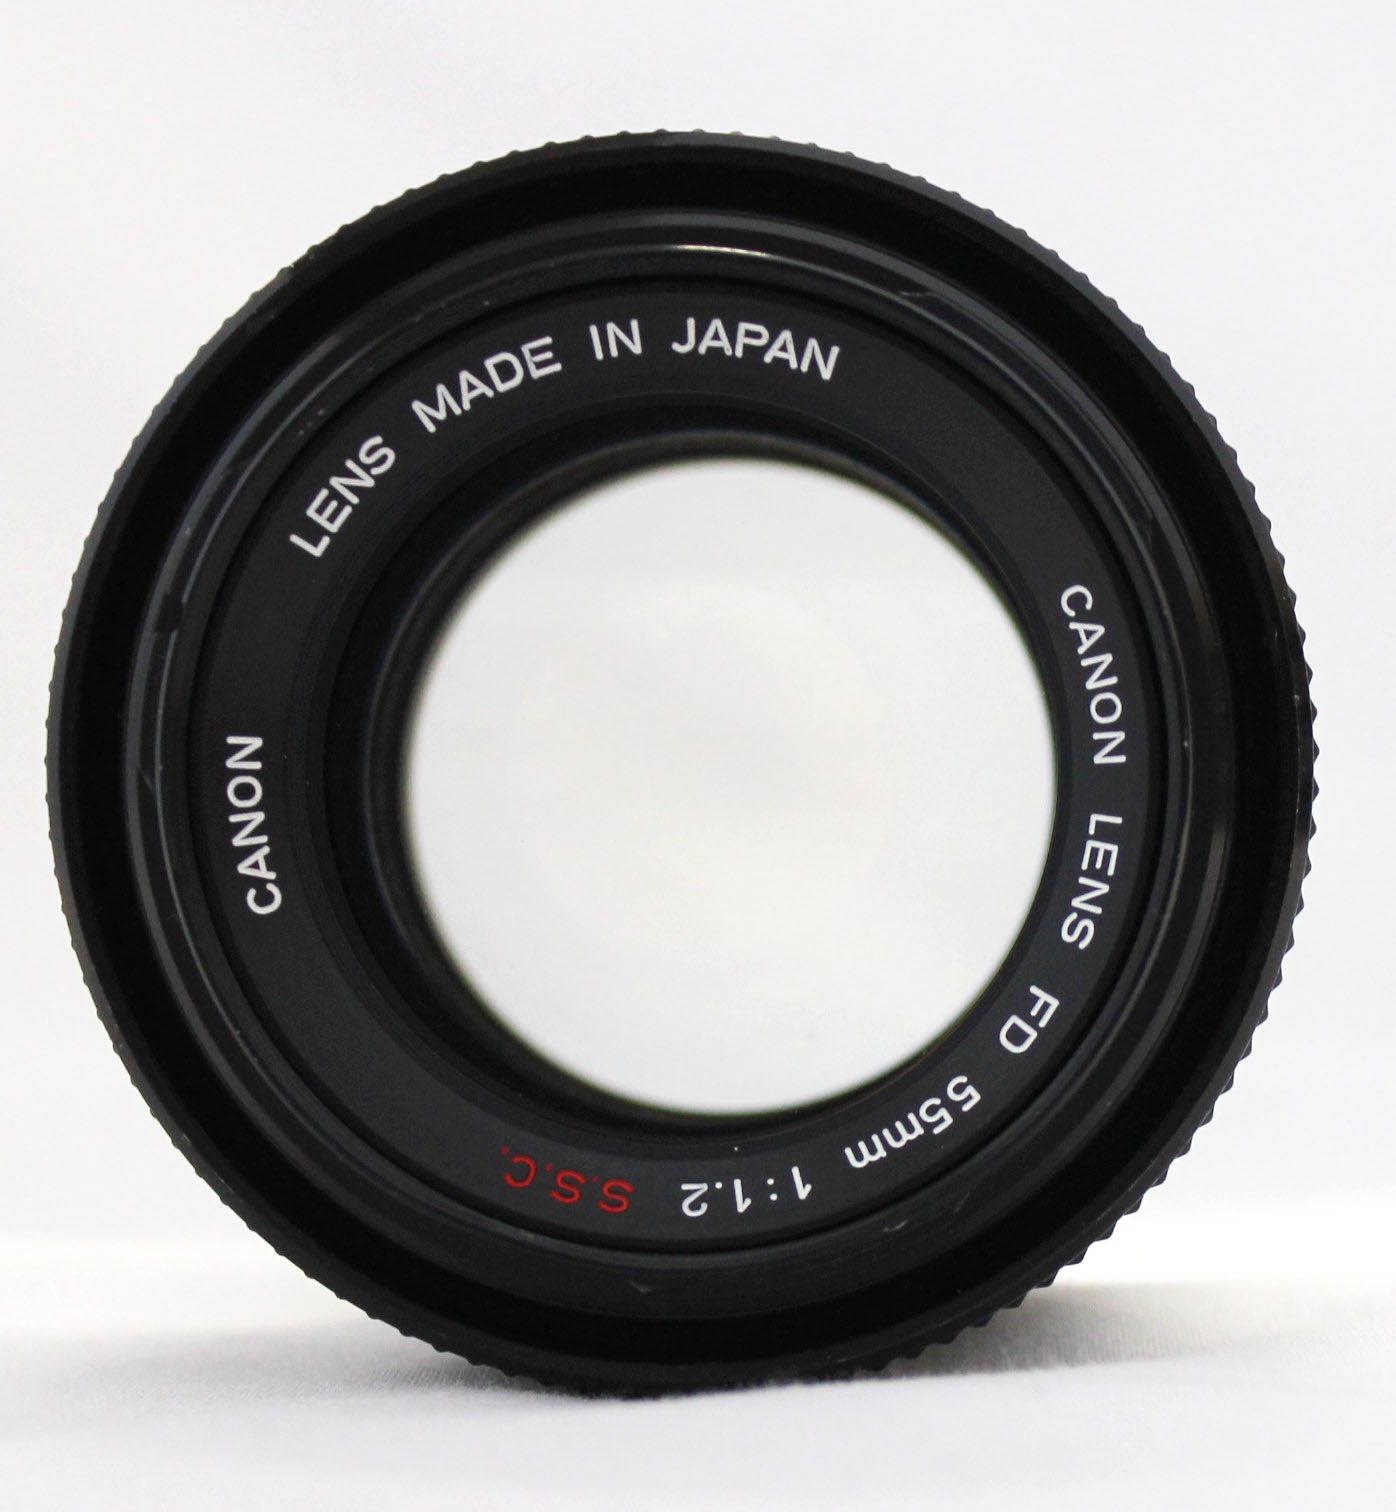  Canon FD 55mm F/1.2 S.S.C. ssc MF Standard Prime Lens from Japan Photo 3